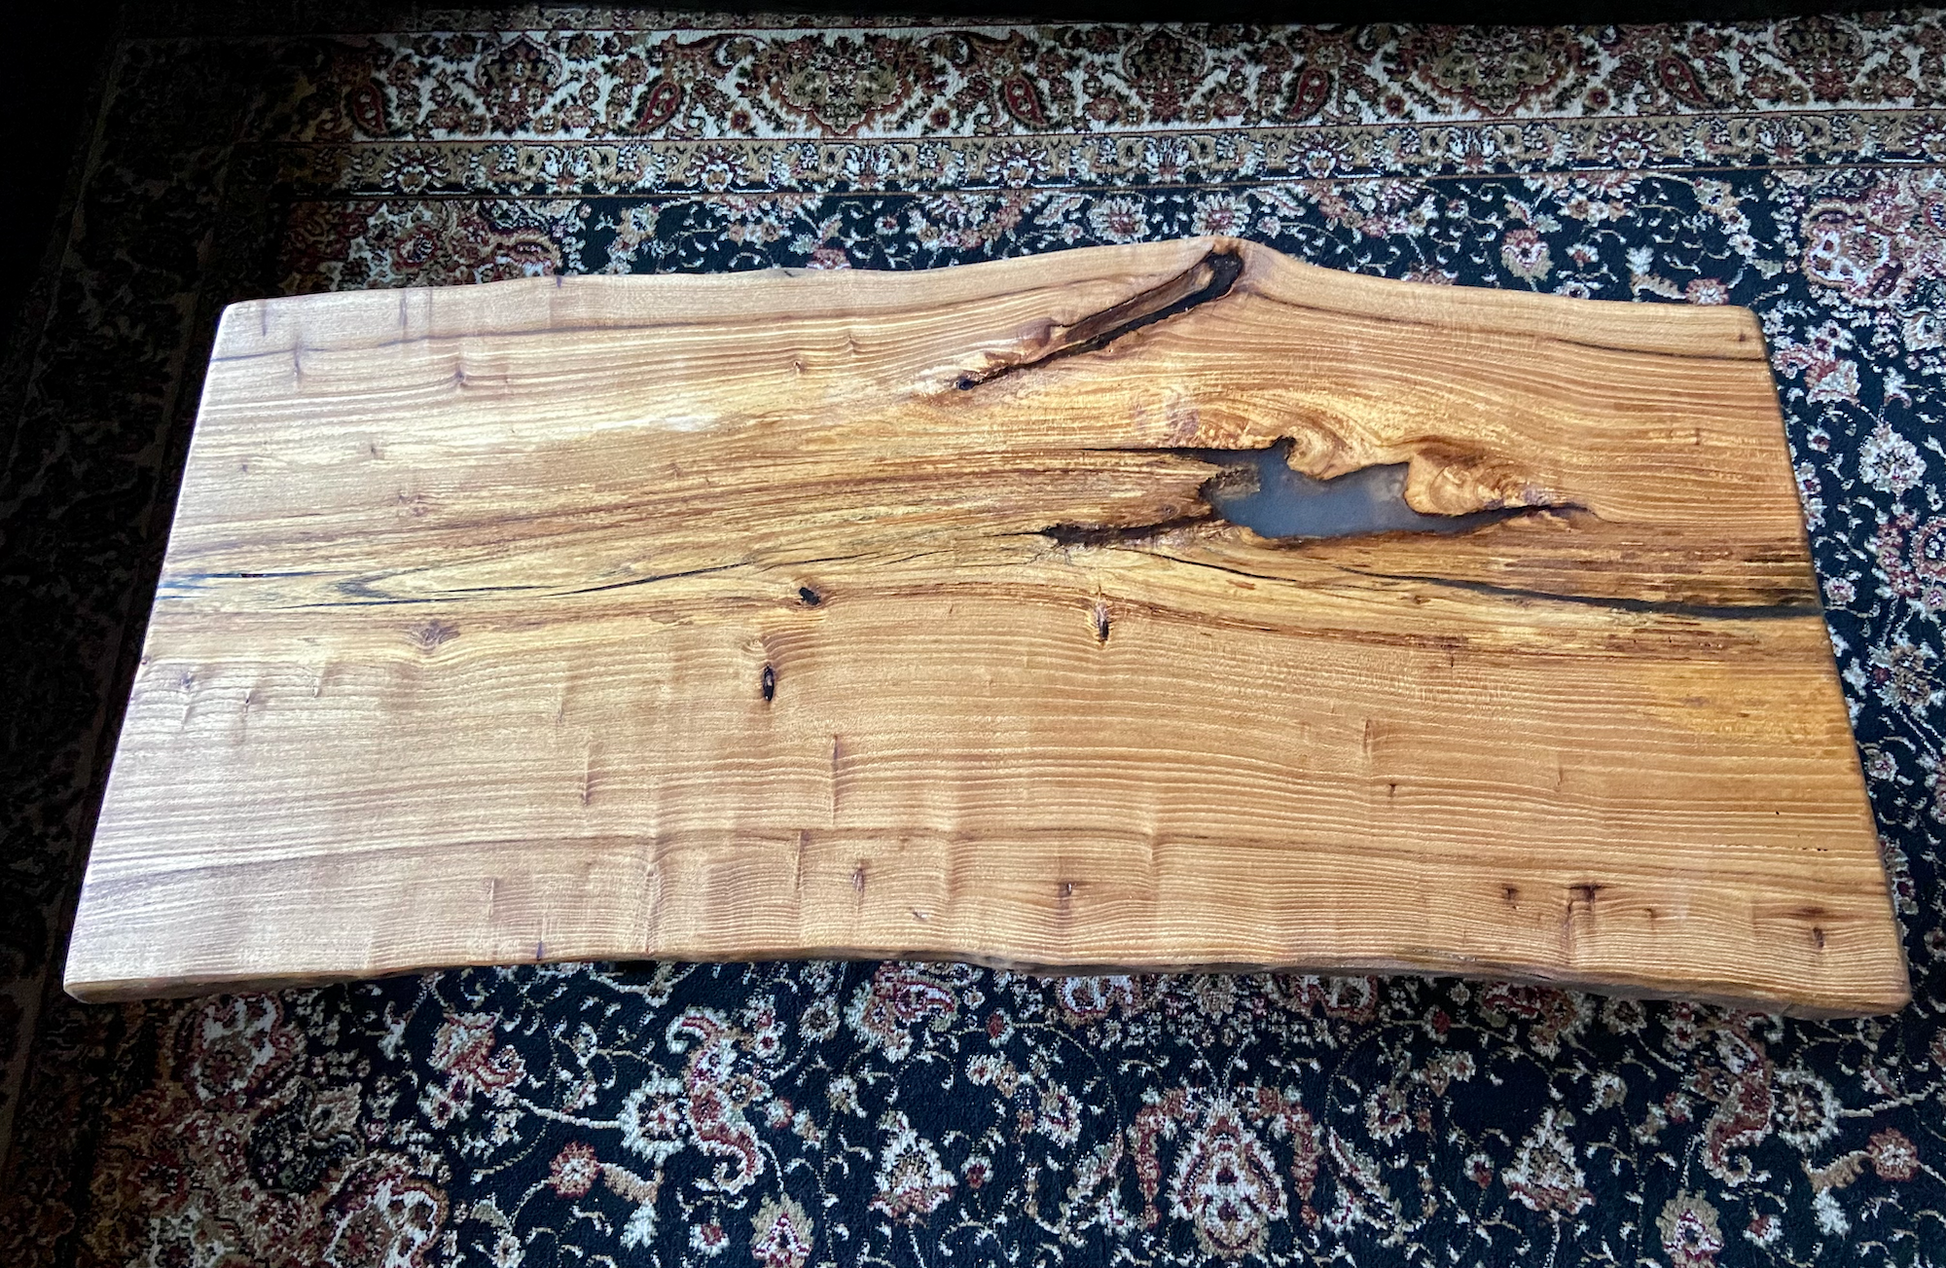 Live Edge Wormy Chestnut Coffee Table w/ Beautiful Natural Voids, Grain Patterns, and Knots